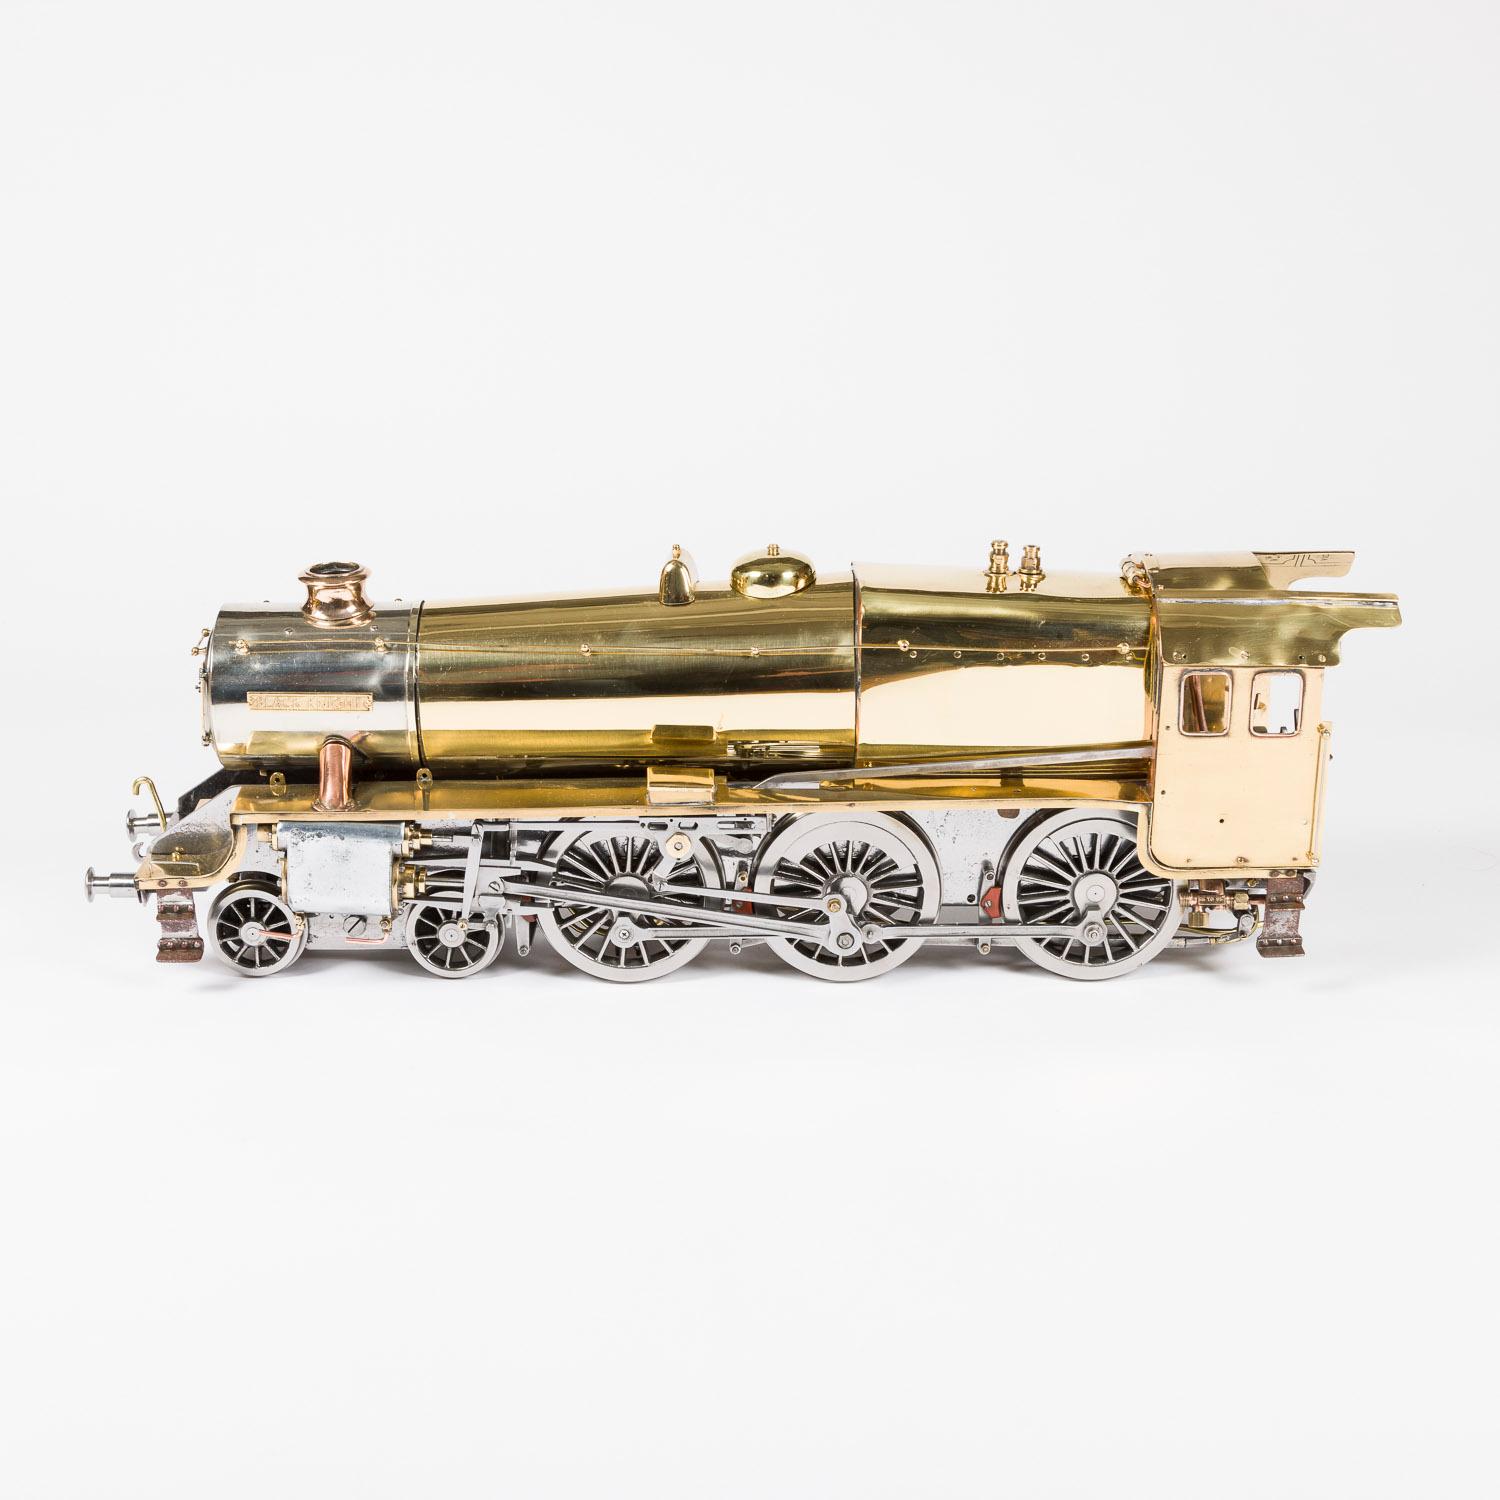 20th Century Model of the 4-6-0 steam locomotive the Black Knight For Sale